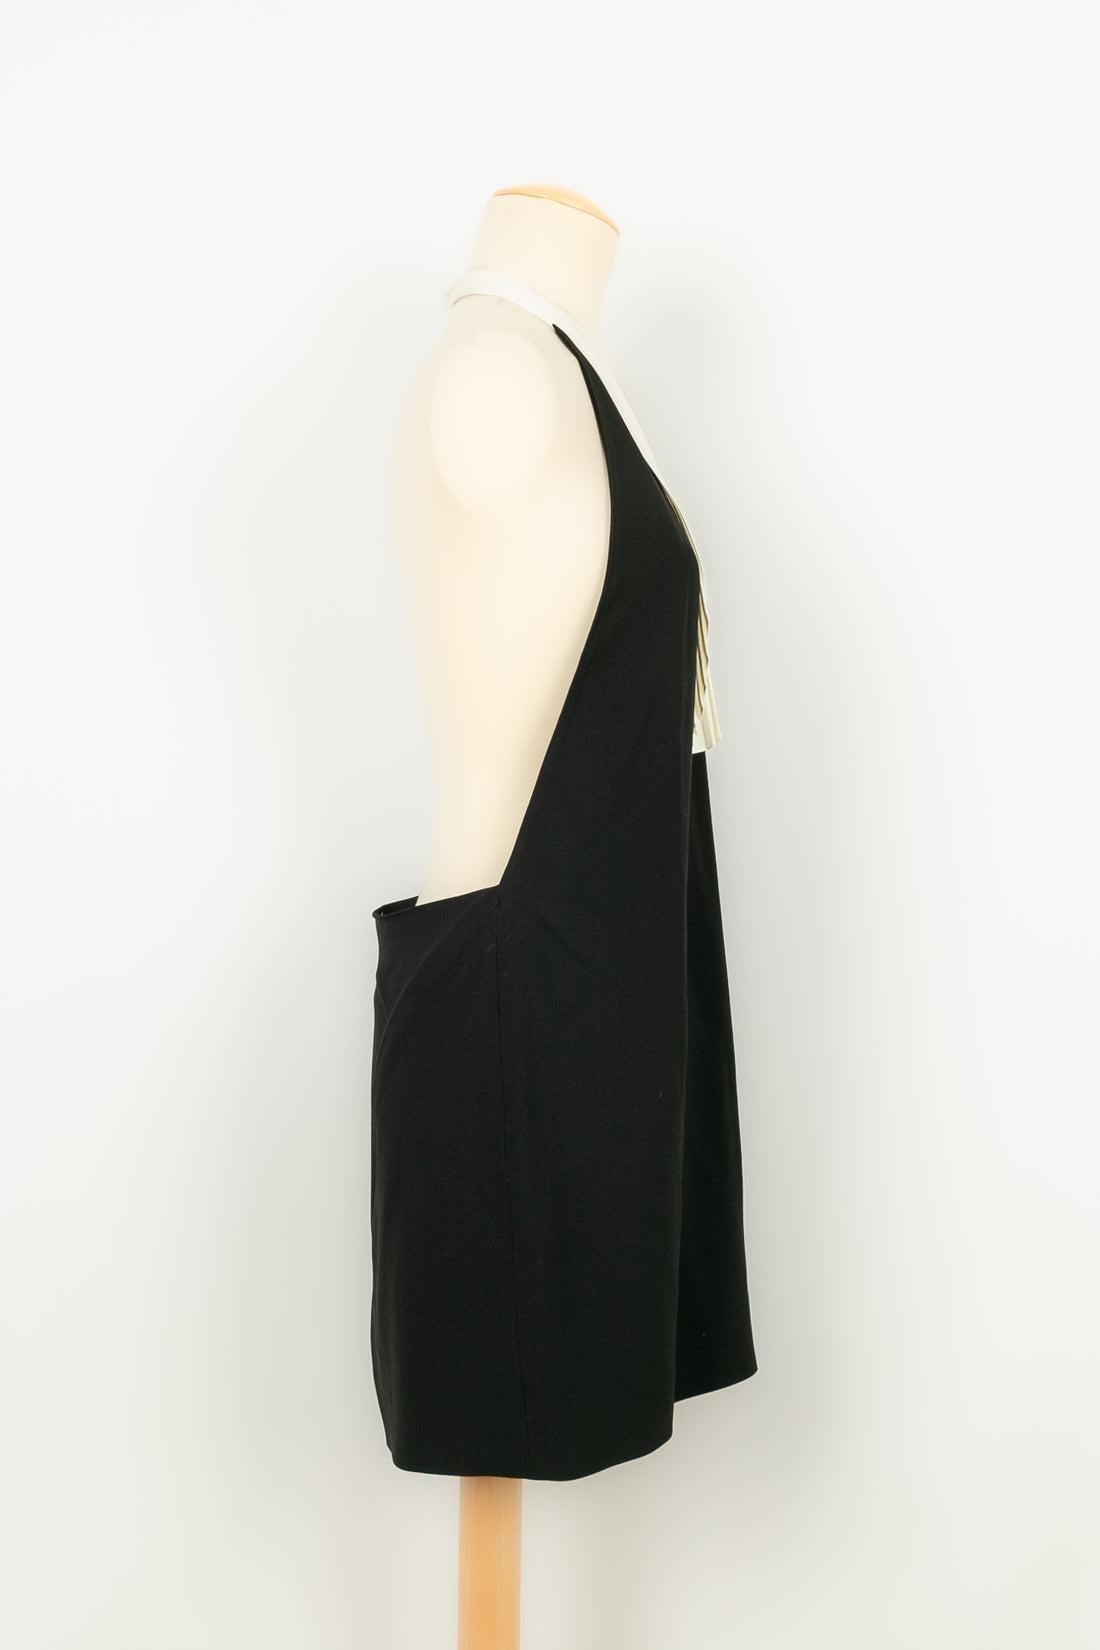 Yves Saint Laurent - Short backless black and white dress. No size indicated, it fits a 40FR.

Additional information:
Condition: Very good condition
Dimensions: Waist: 42 cm - Length: 85 cm

Seller Reference: VR249
